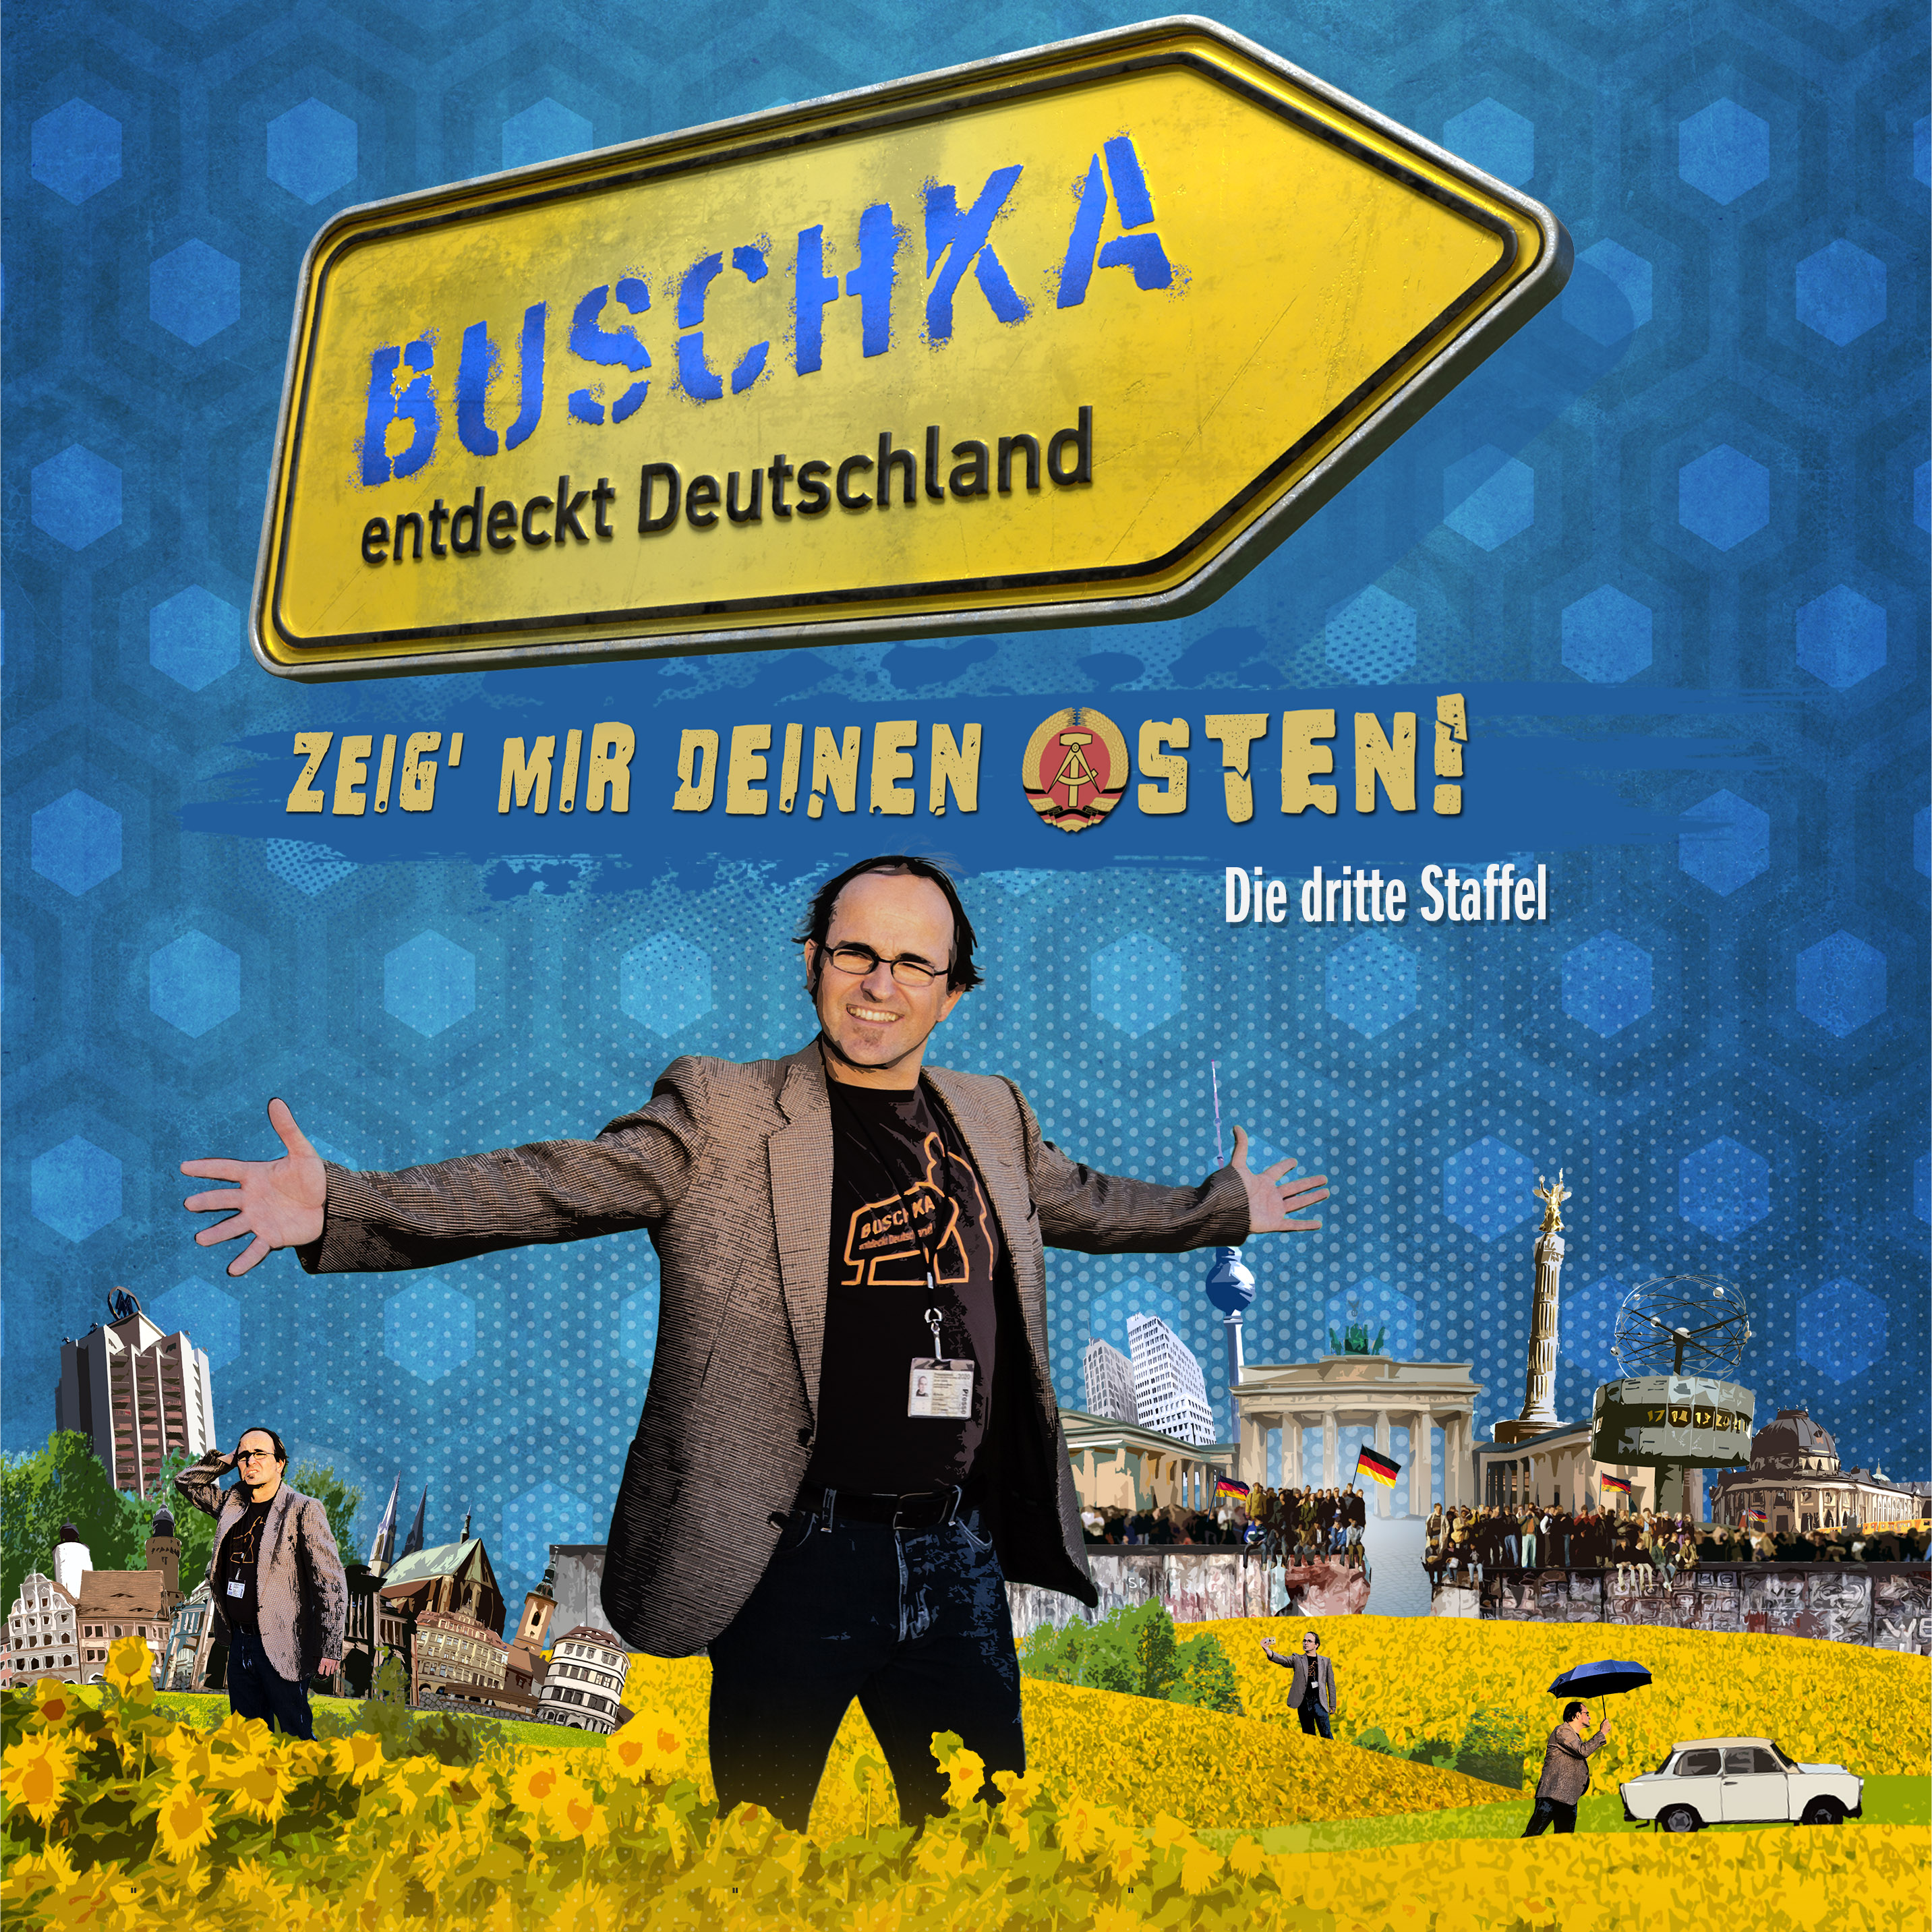 Buschka discovers Germany - Show Me Your East Side! (S03/E04 feat. former GDR civil rights activist Heiko Lietz, Schwerin)